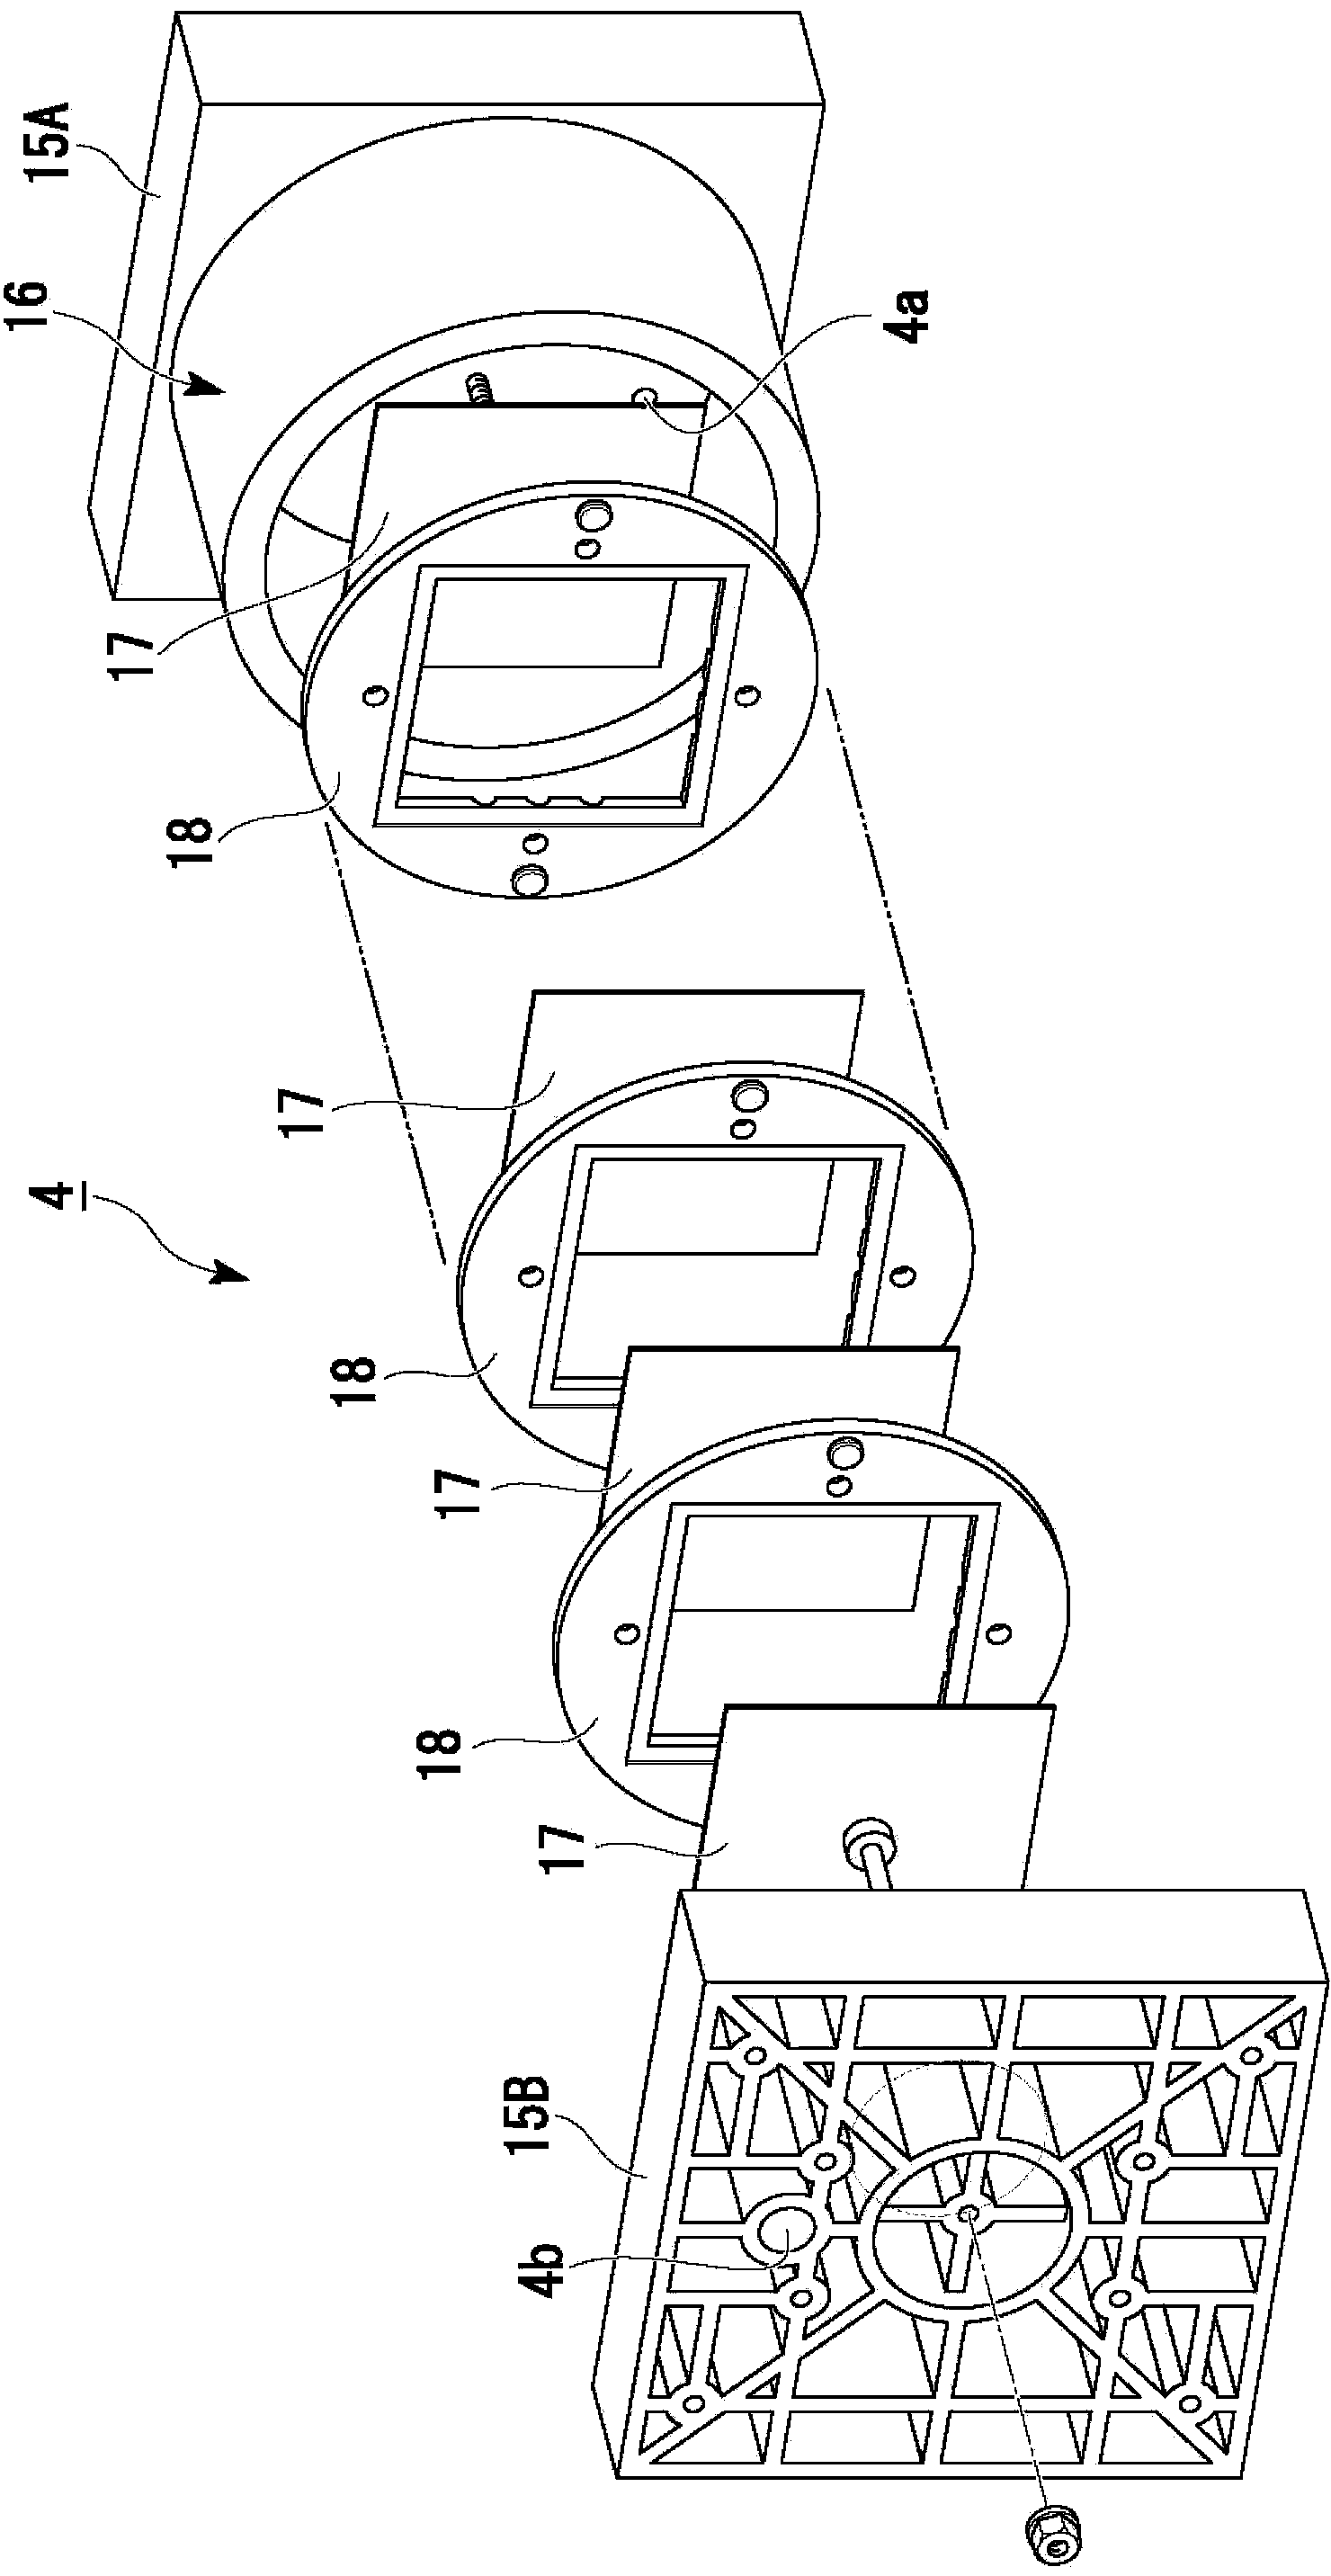 Electrolyzed water manufacturing device